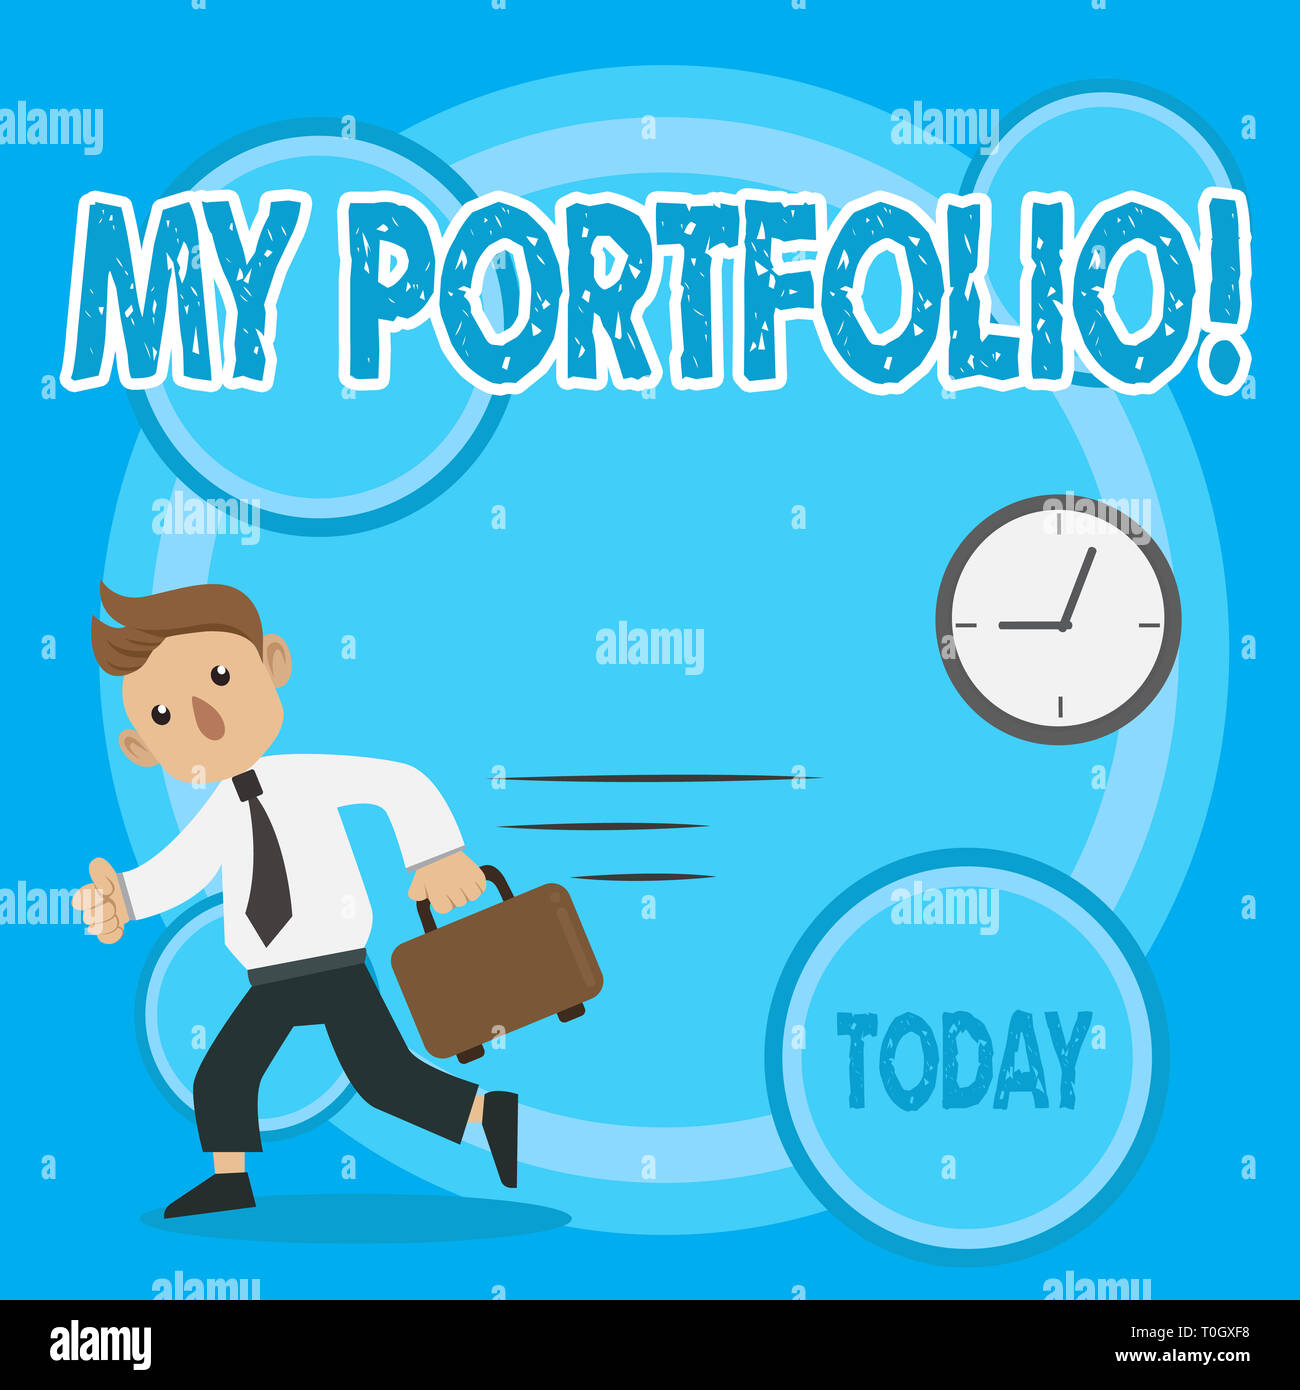 Hustle concept view stock photo. Image of text, paper - 264433096